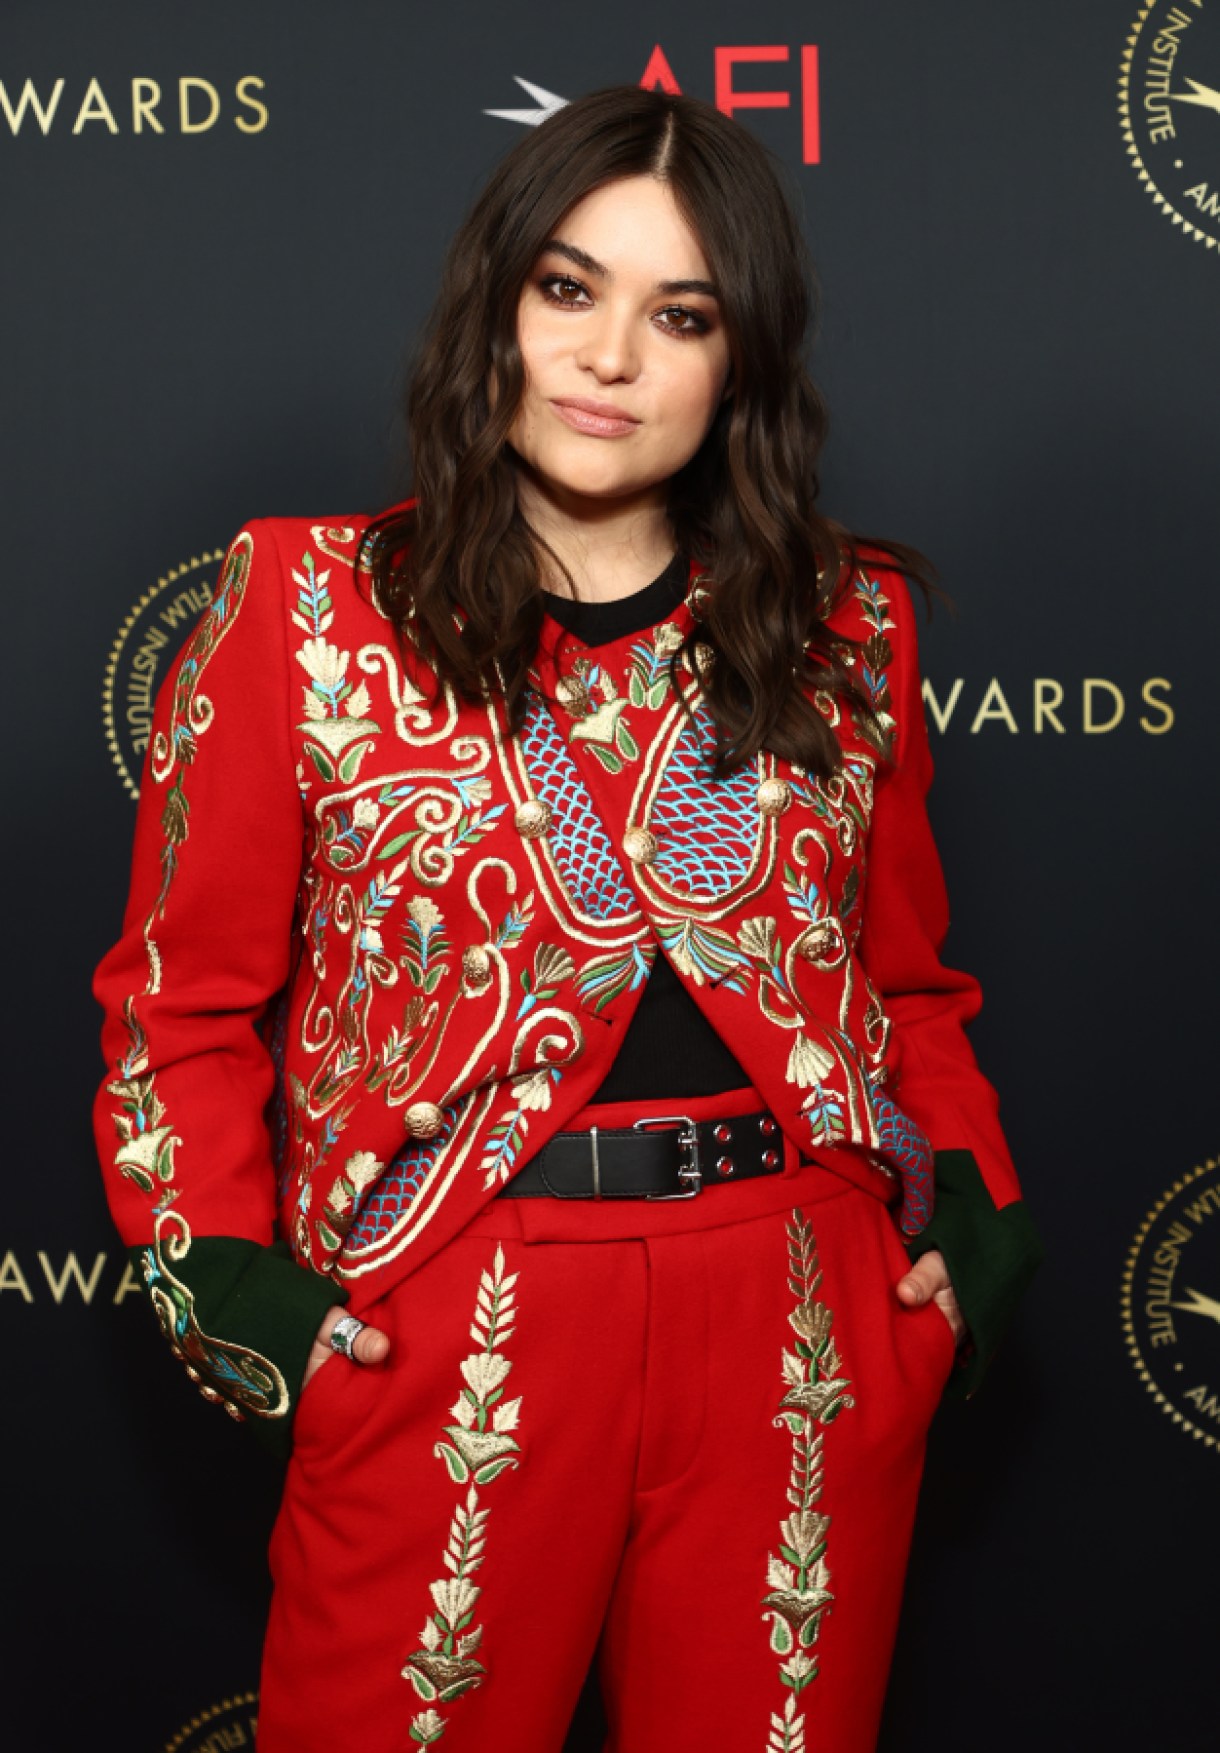 BEVERLY HILLS, CALIFORNIA - MARCH 11: Devery Jacobs attends the AFI Awards Luncheon at Beverly Wilshire, A Four Seasons Hotel on March 11, 2022 in Beverly Hills, California. (Photo by Emma McIntyre/Getty Images)